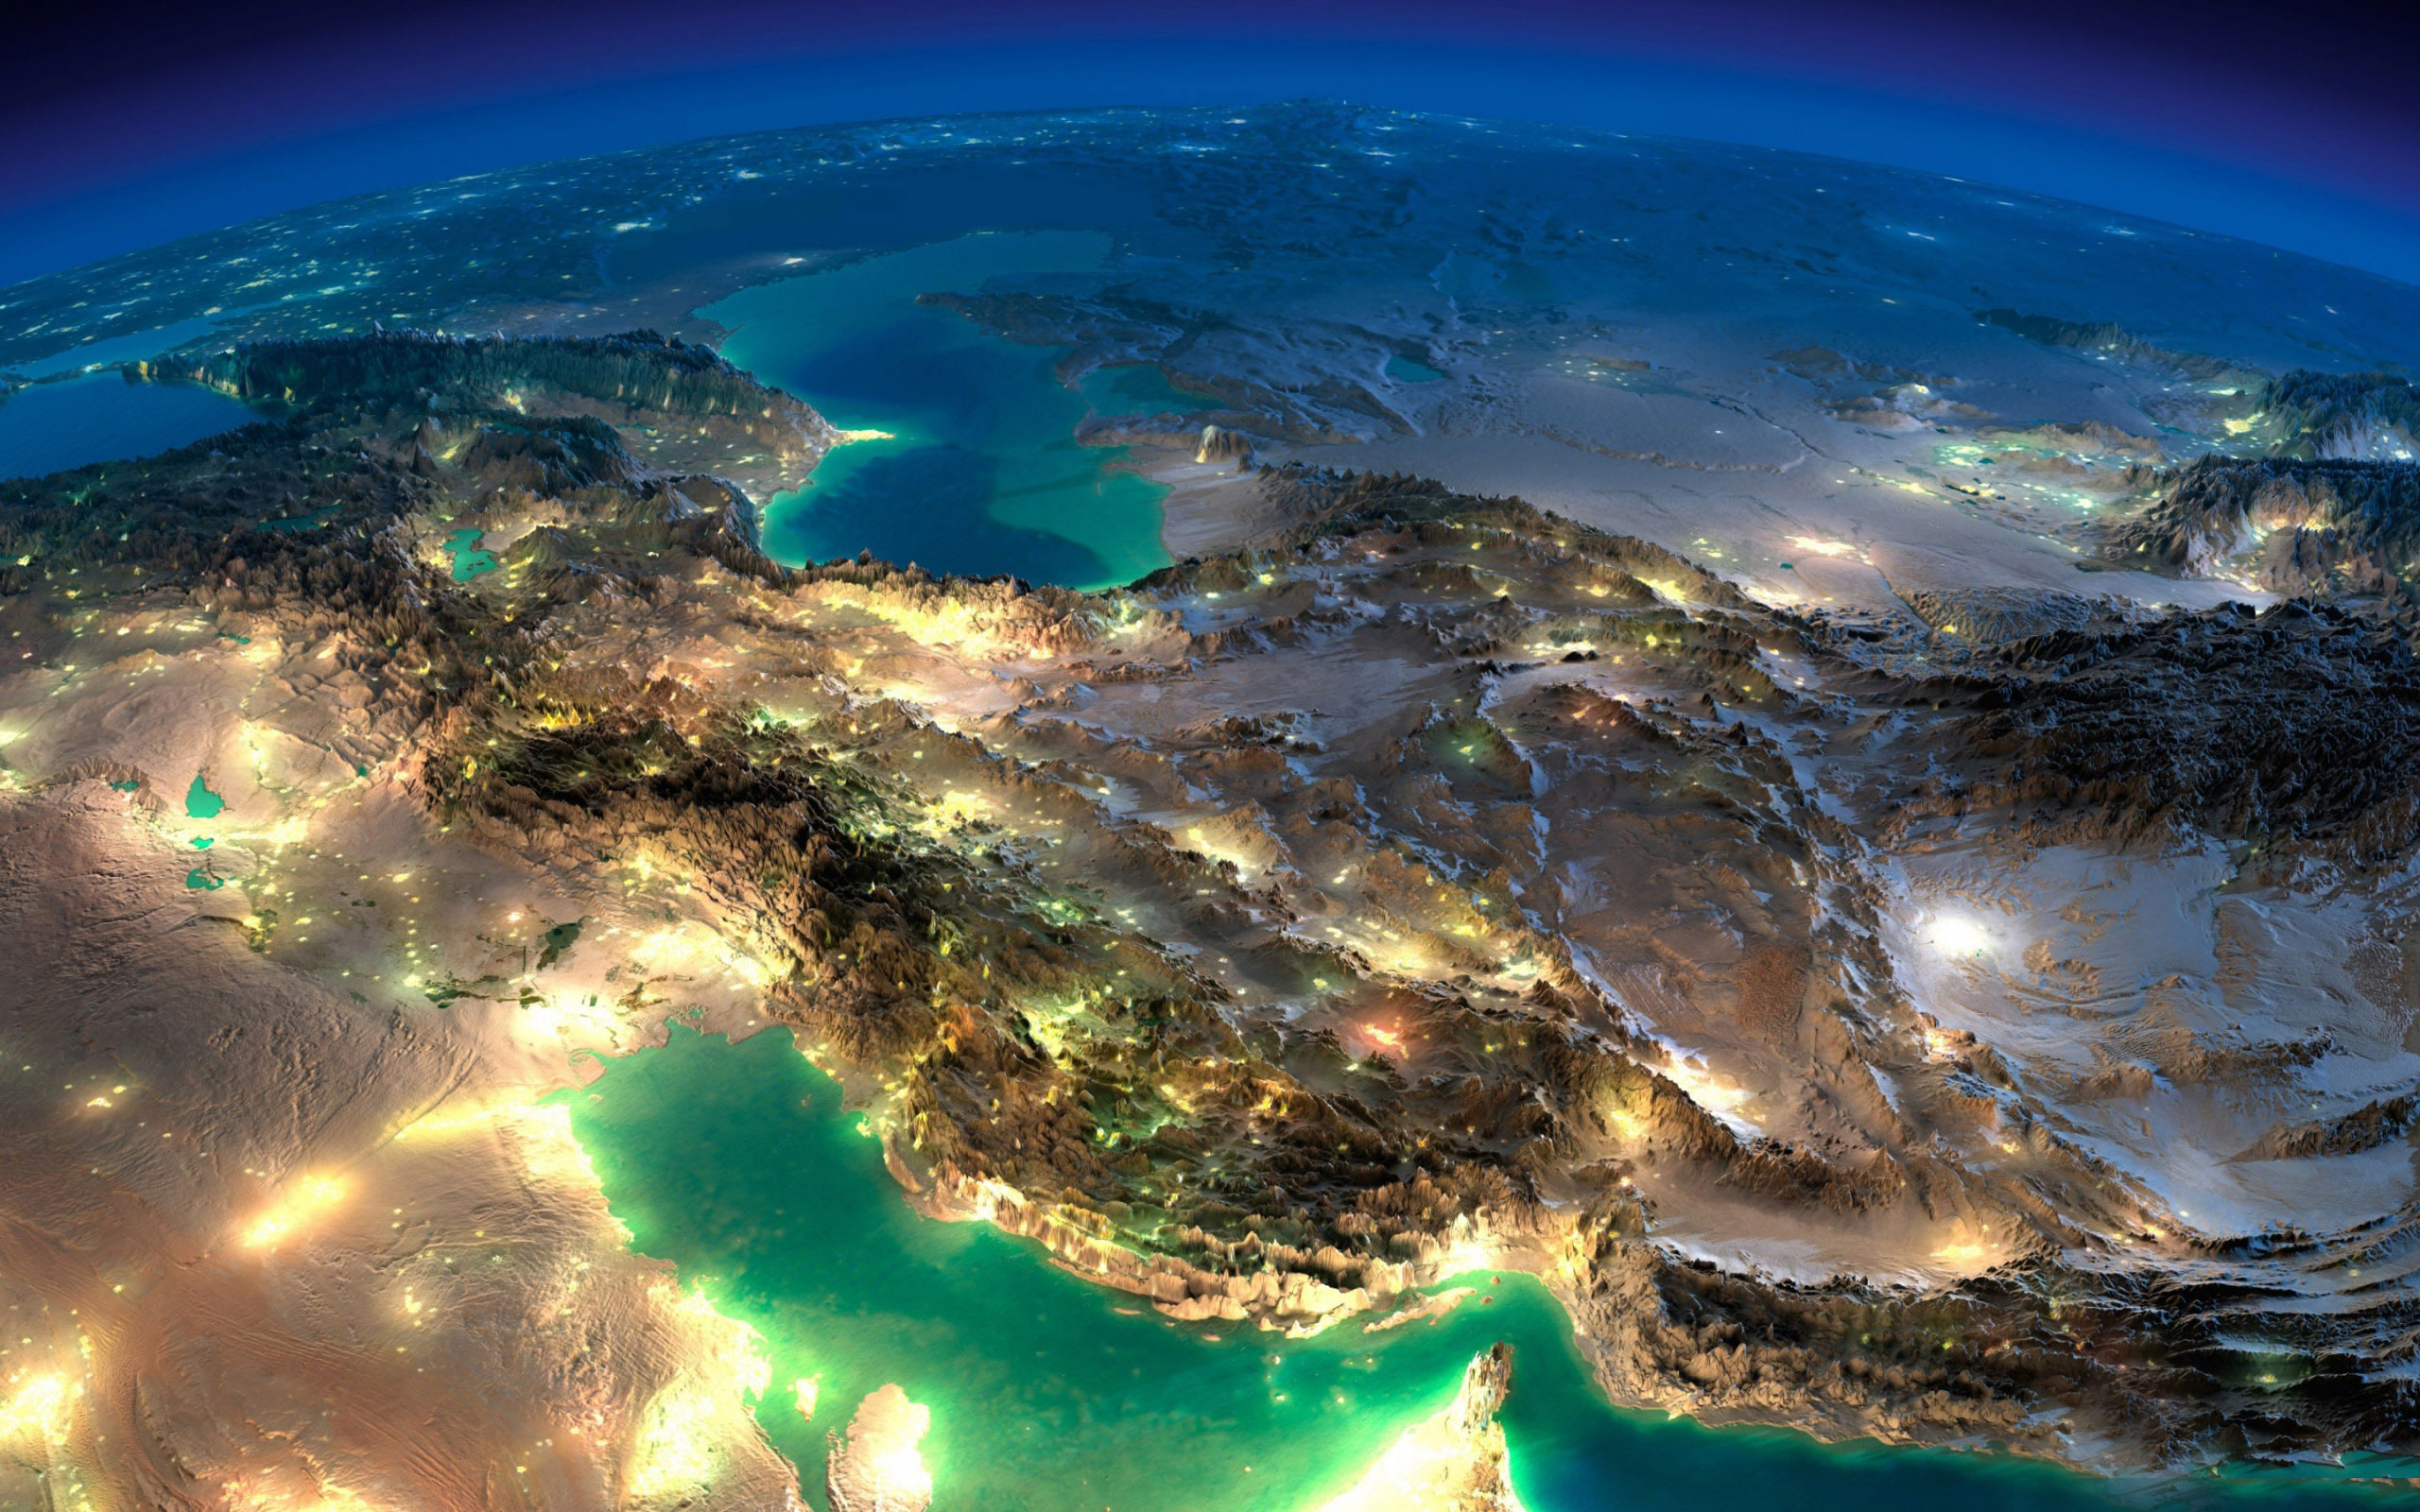 Iran from space